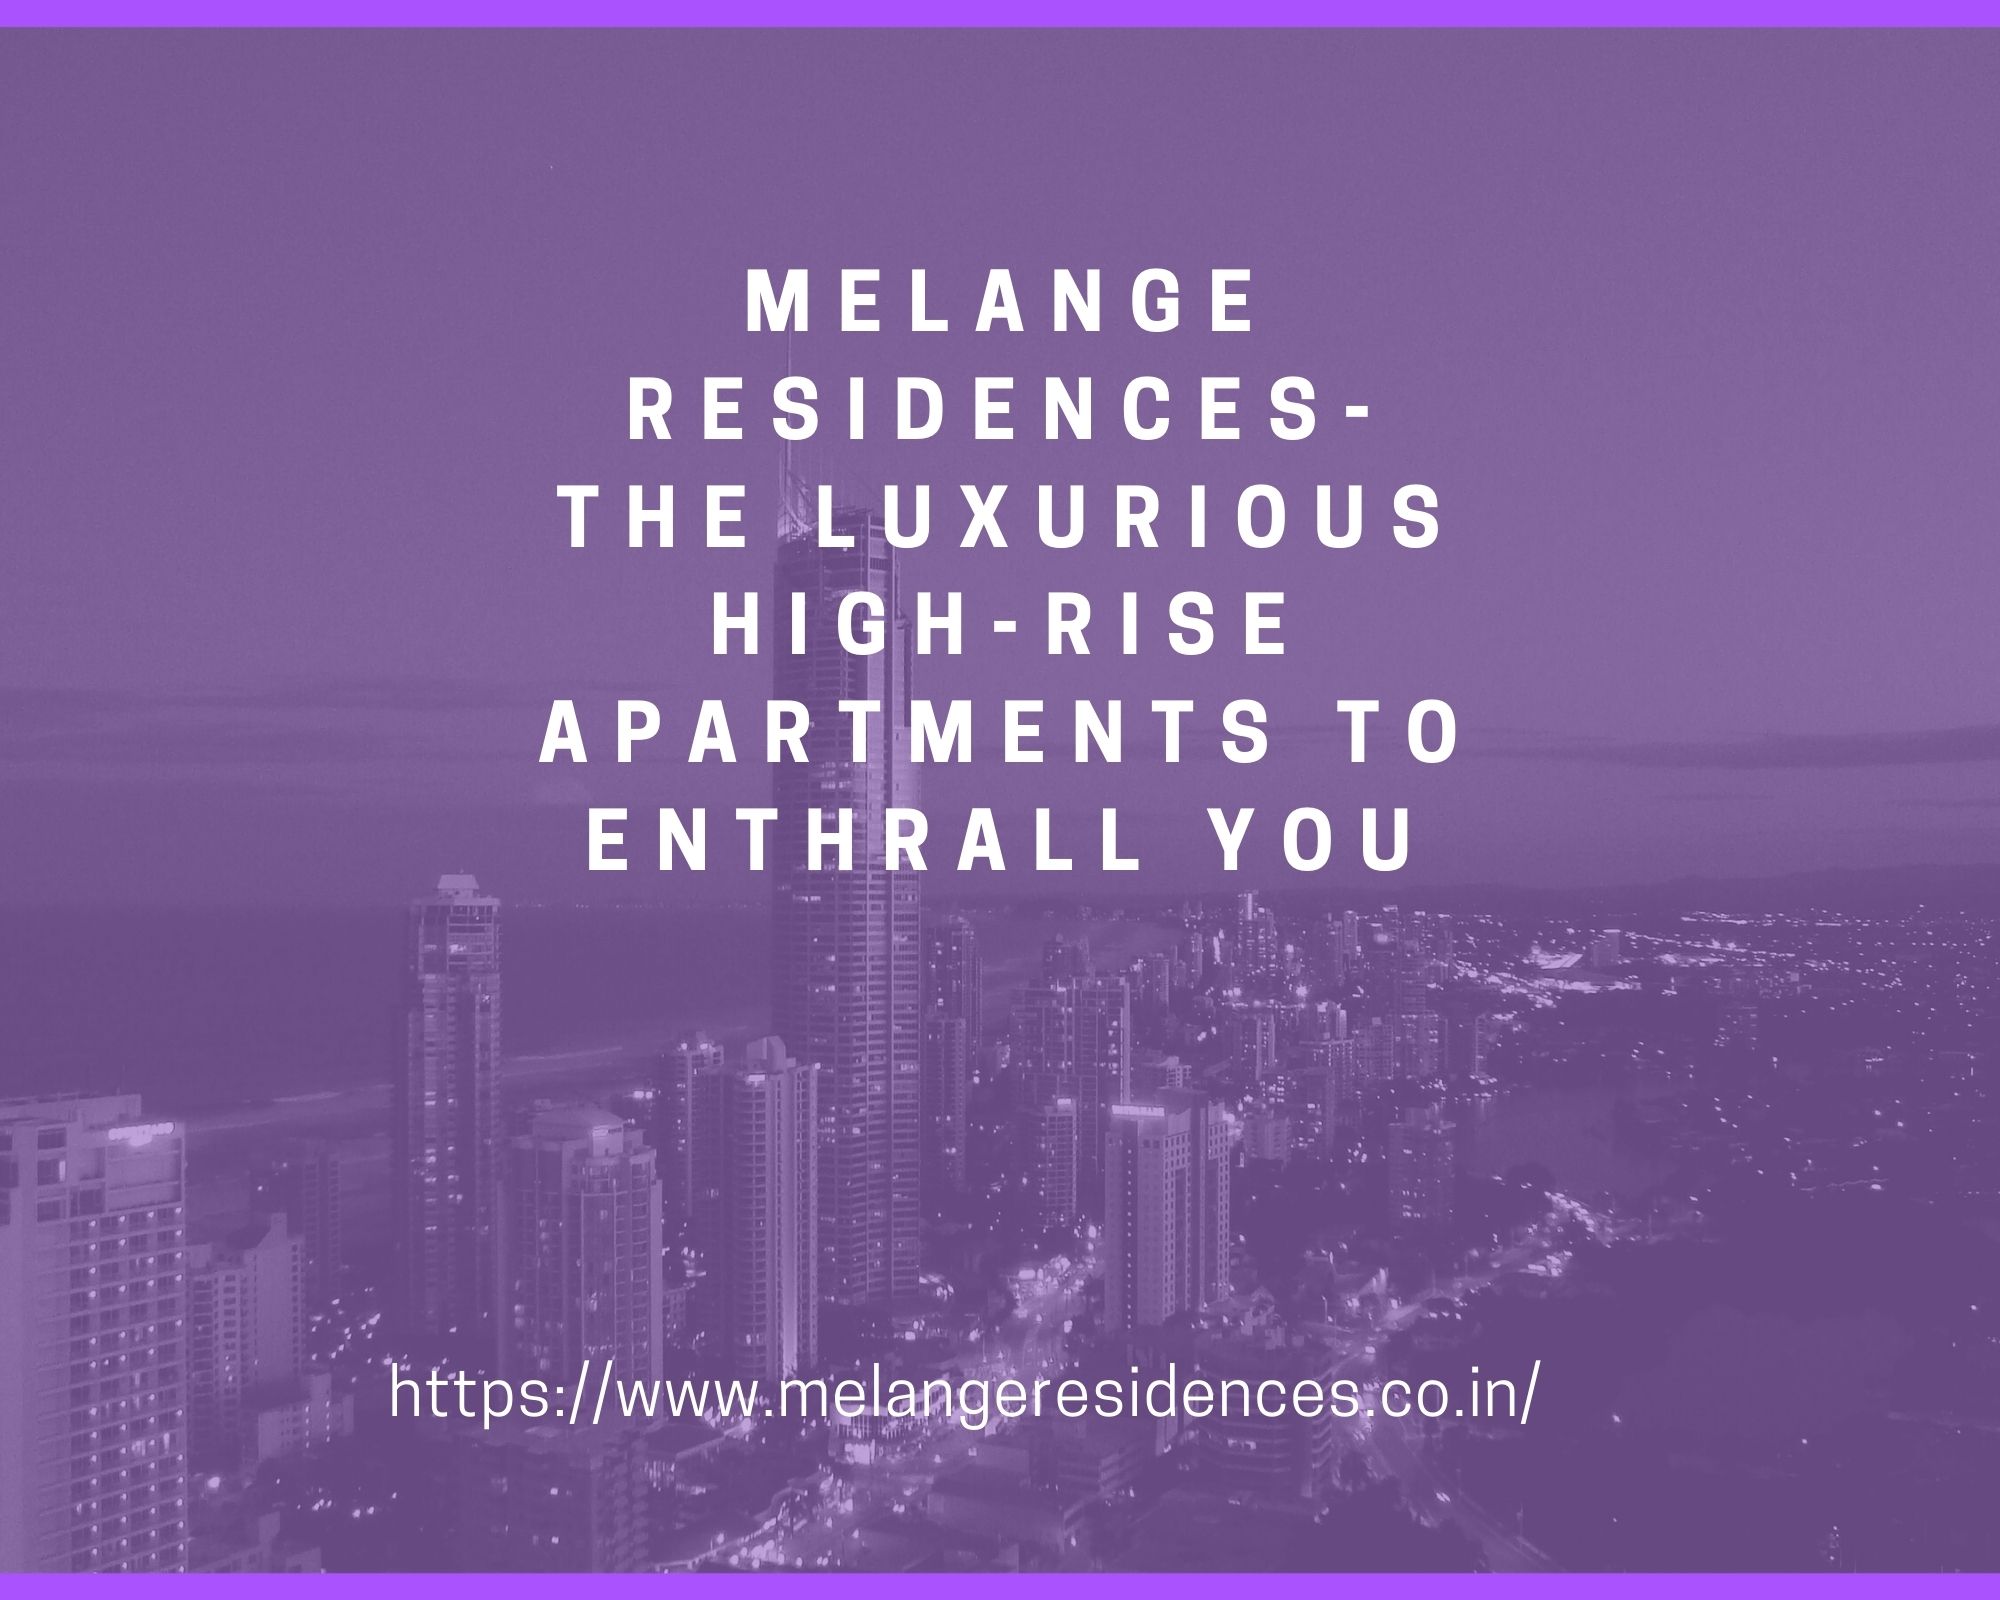 Melange Residences- The Luxurious High-rise Apartments to enthrall you